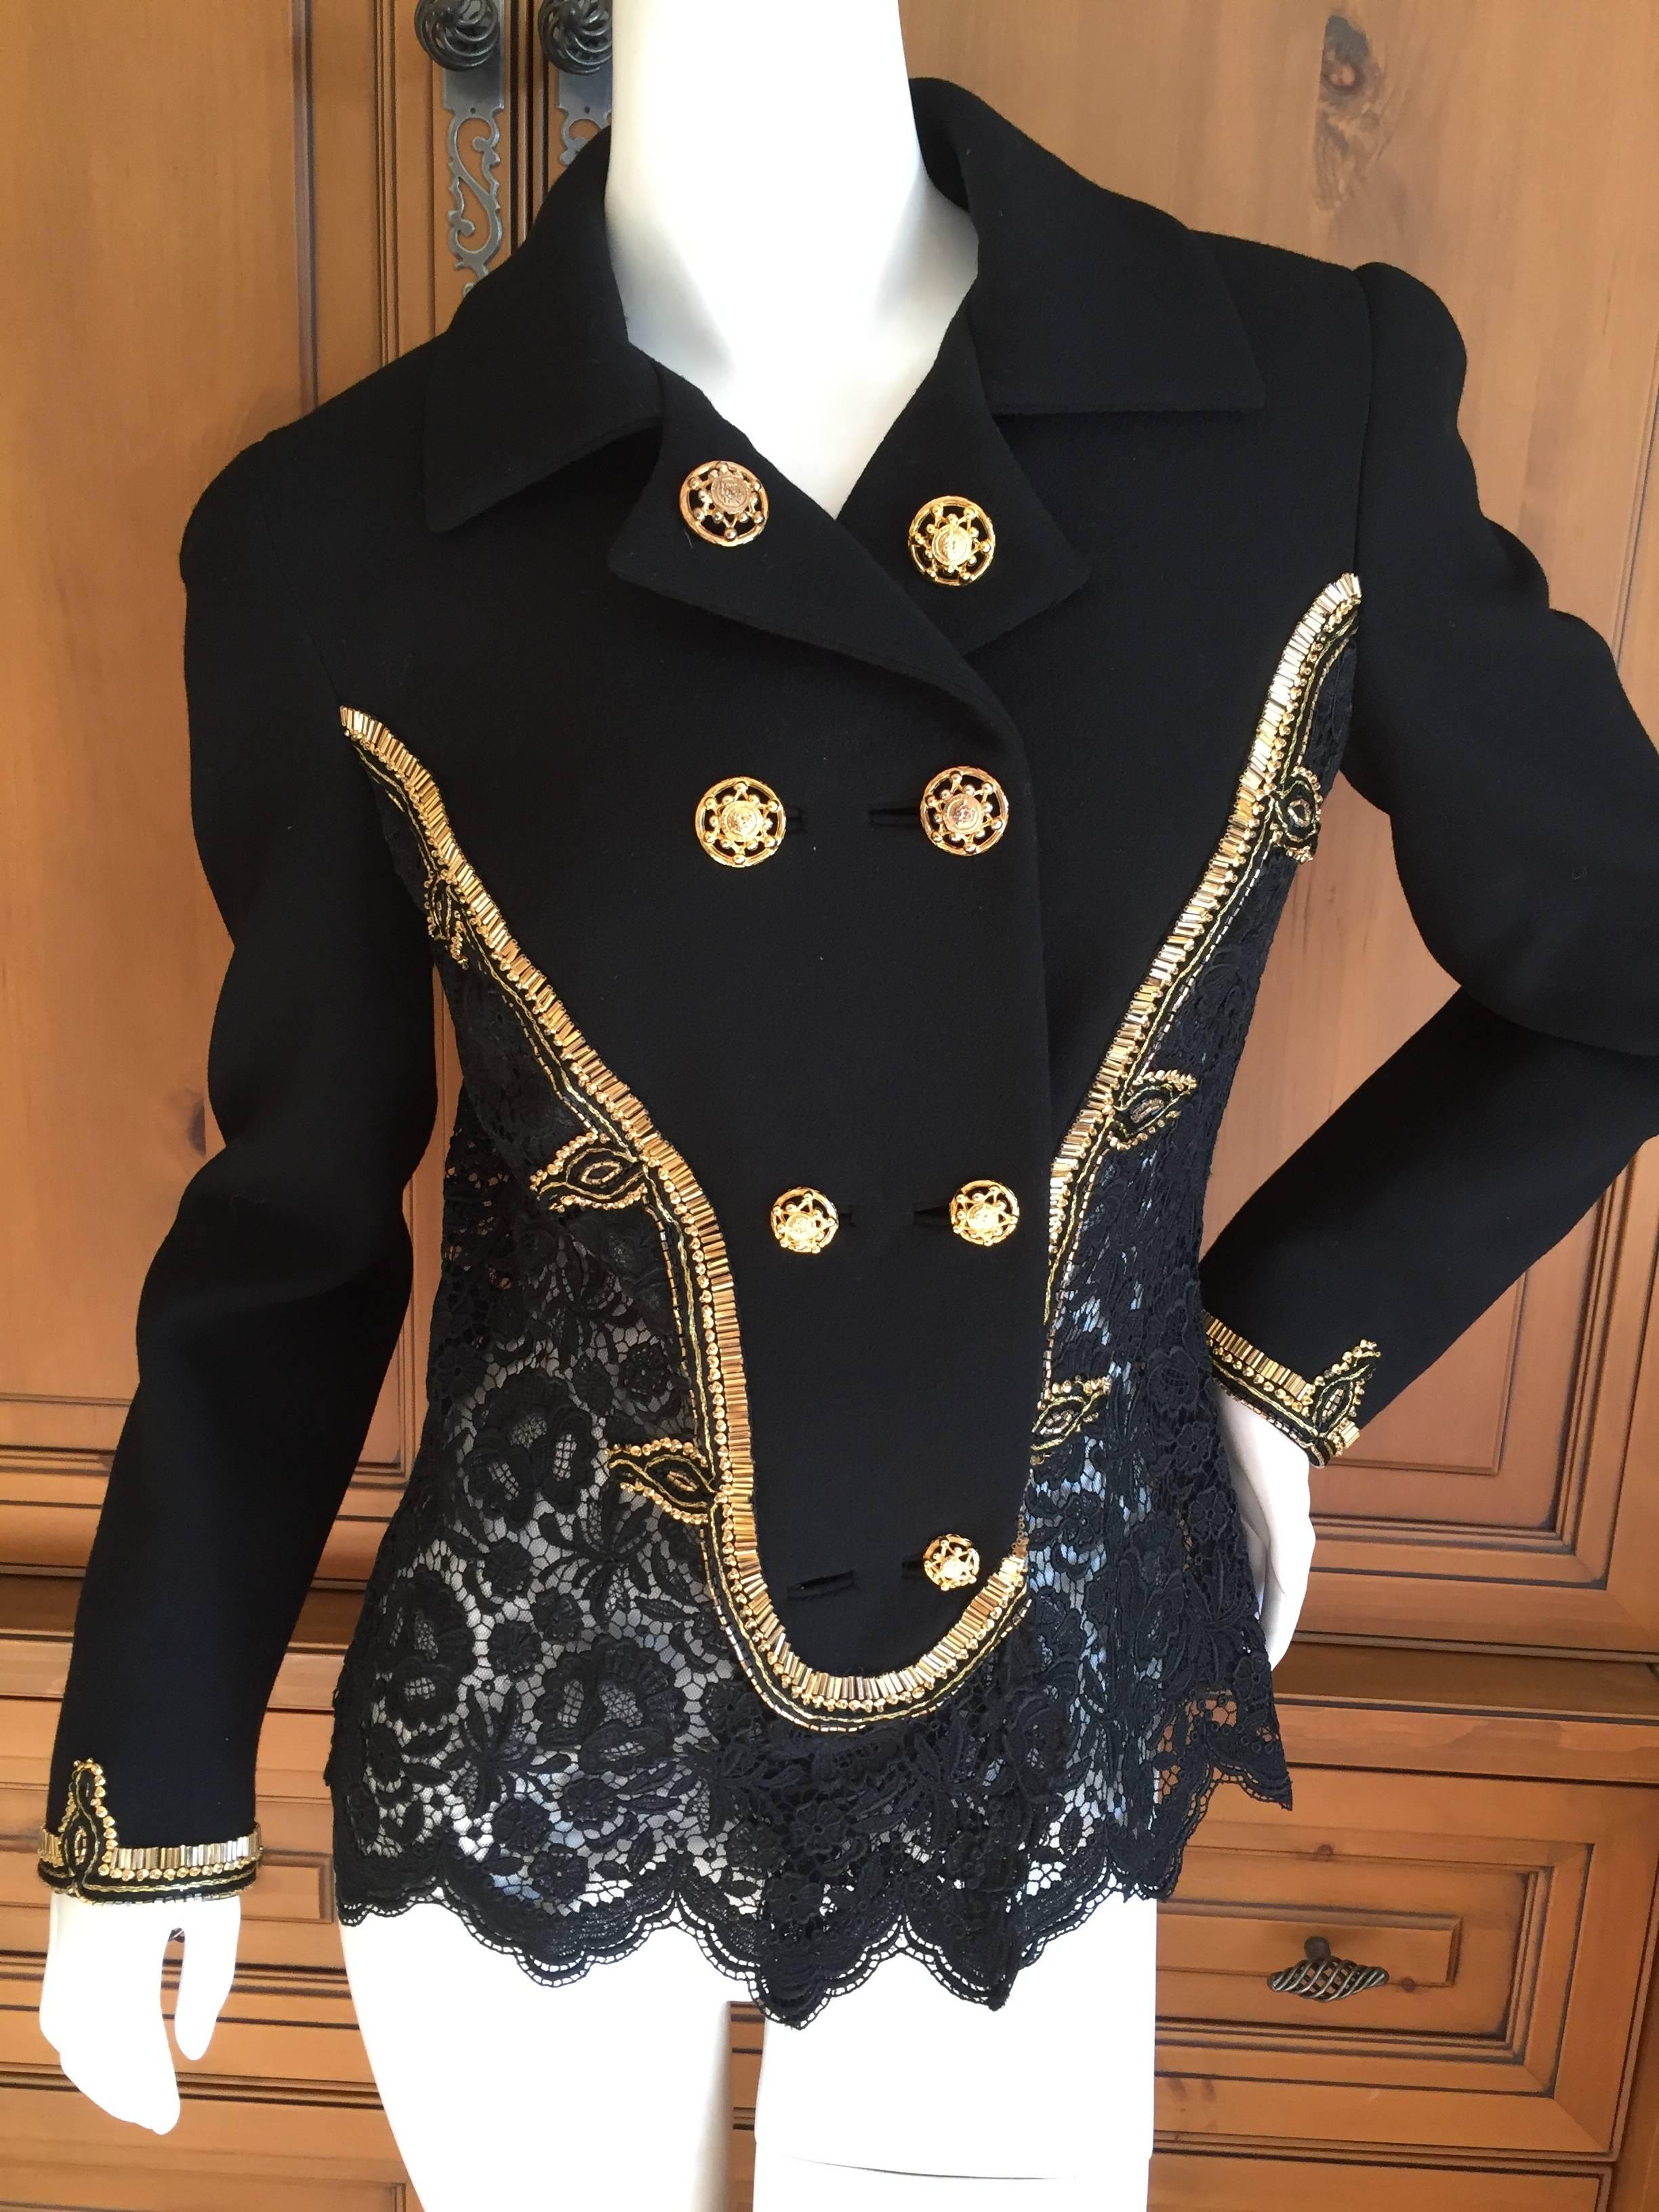 Black lace jacket with beaded embellishments from Gianni Versace Couture .
The details are so beautiful and include scalloped edging and gold bugle beads.
Missing one small button at bottom.
Size 40
Bust 39